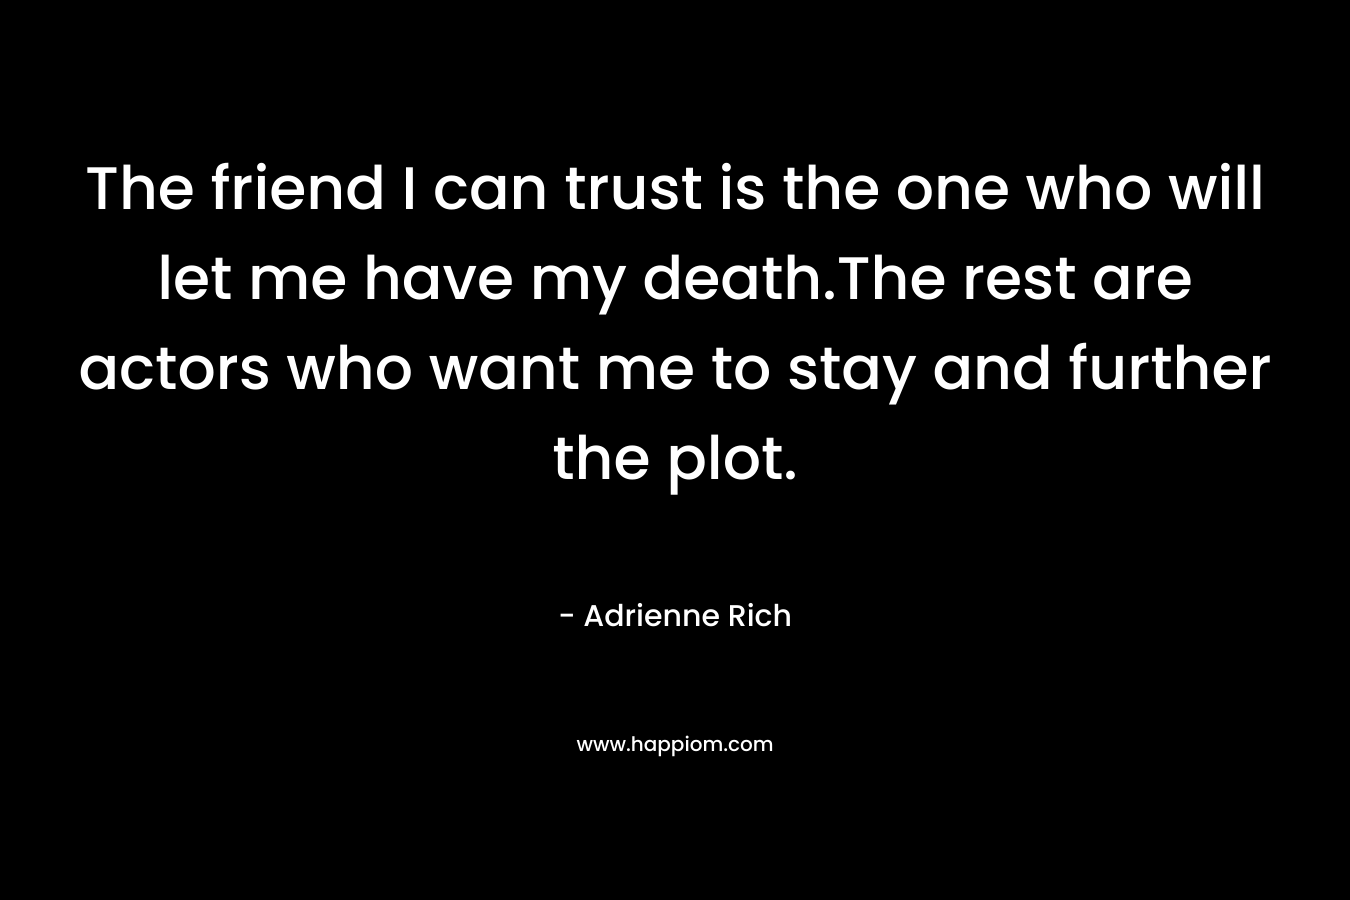 The friend I can trust is the one who will let me have my death.The rest are actors who want me to stay and further the plot.